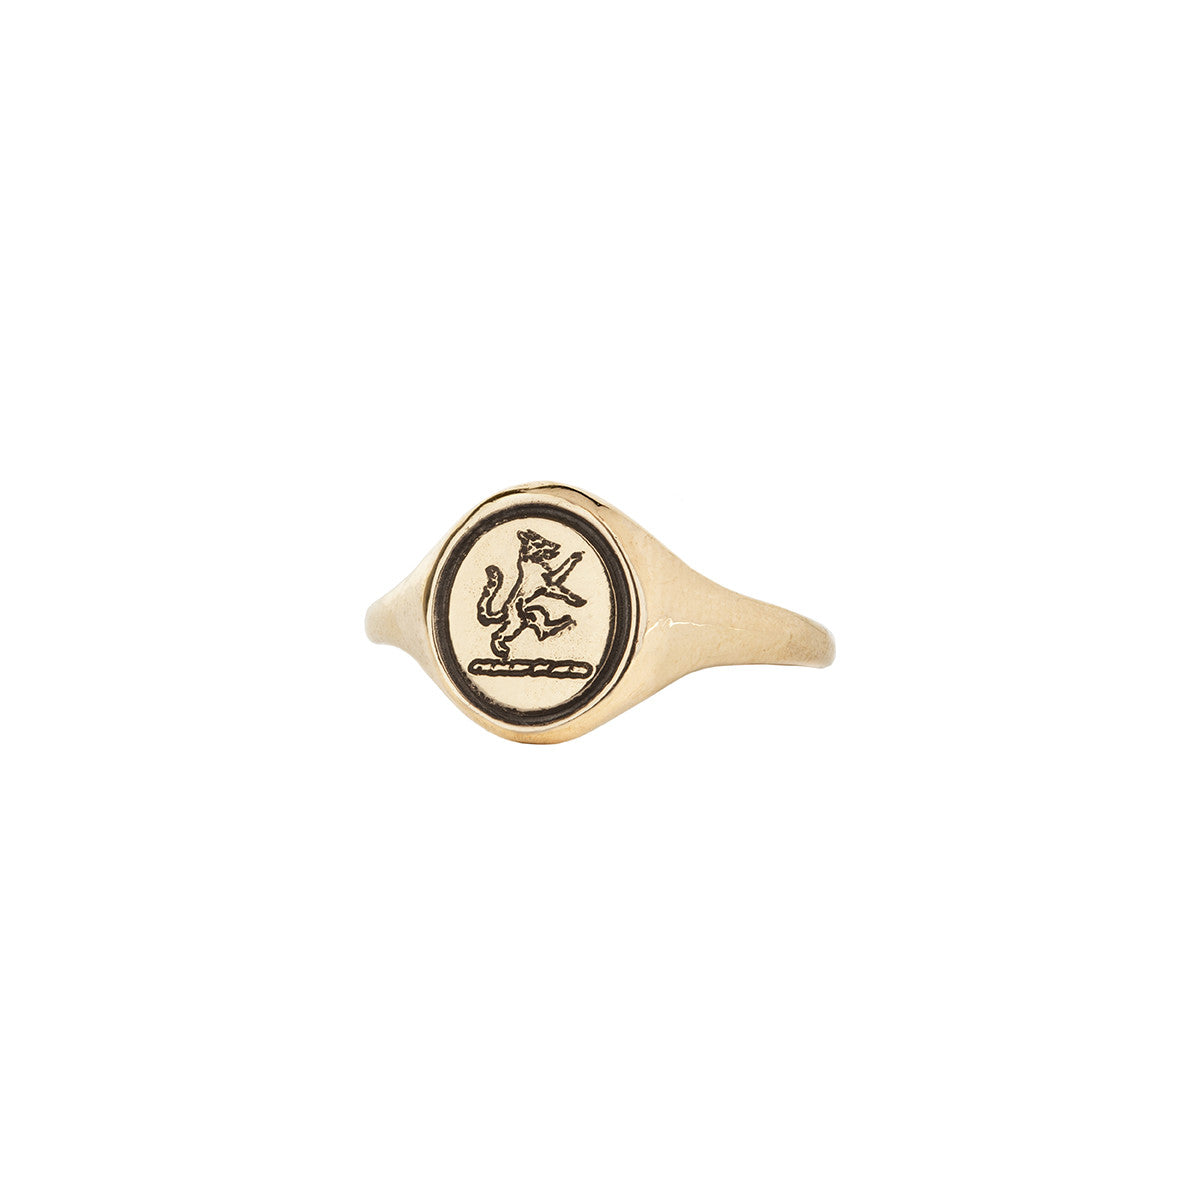 A 14 karat gold ring with our Wolf signet pictured on the top.